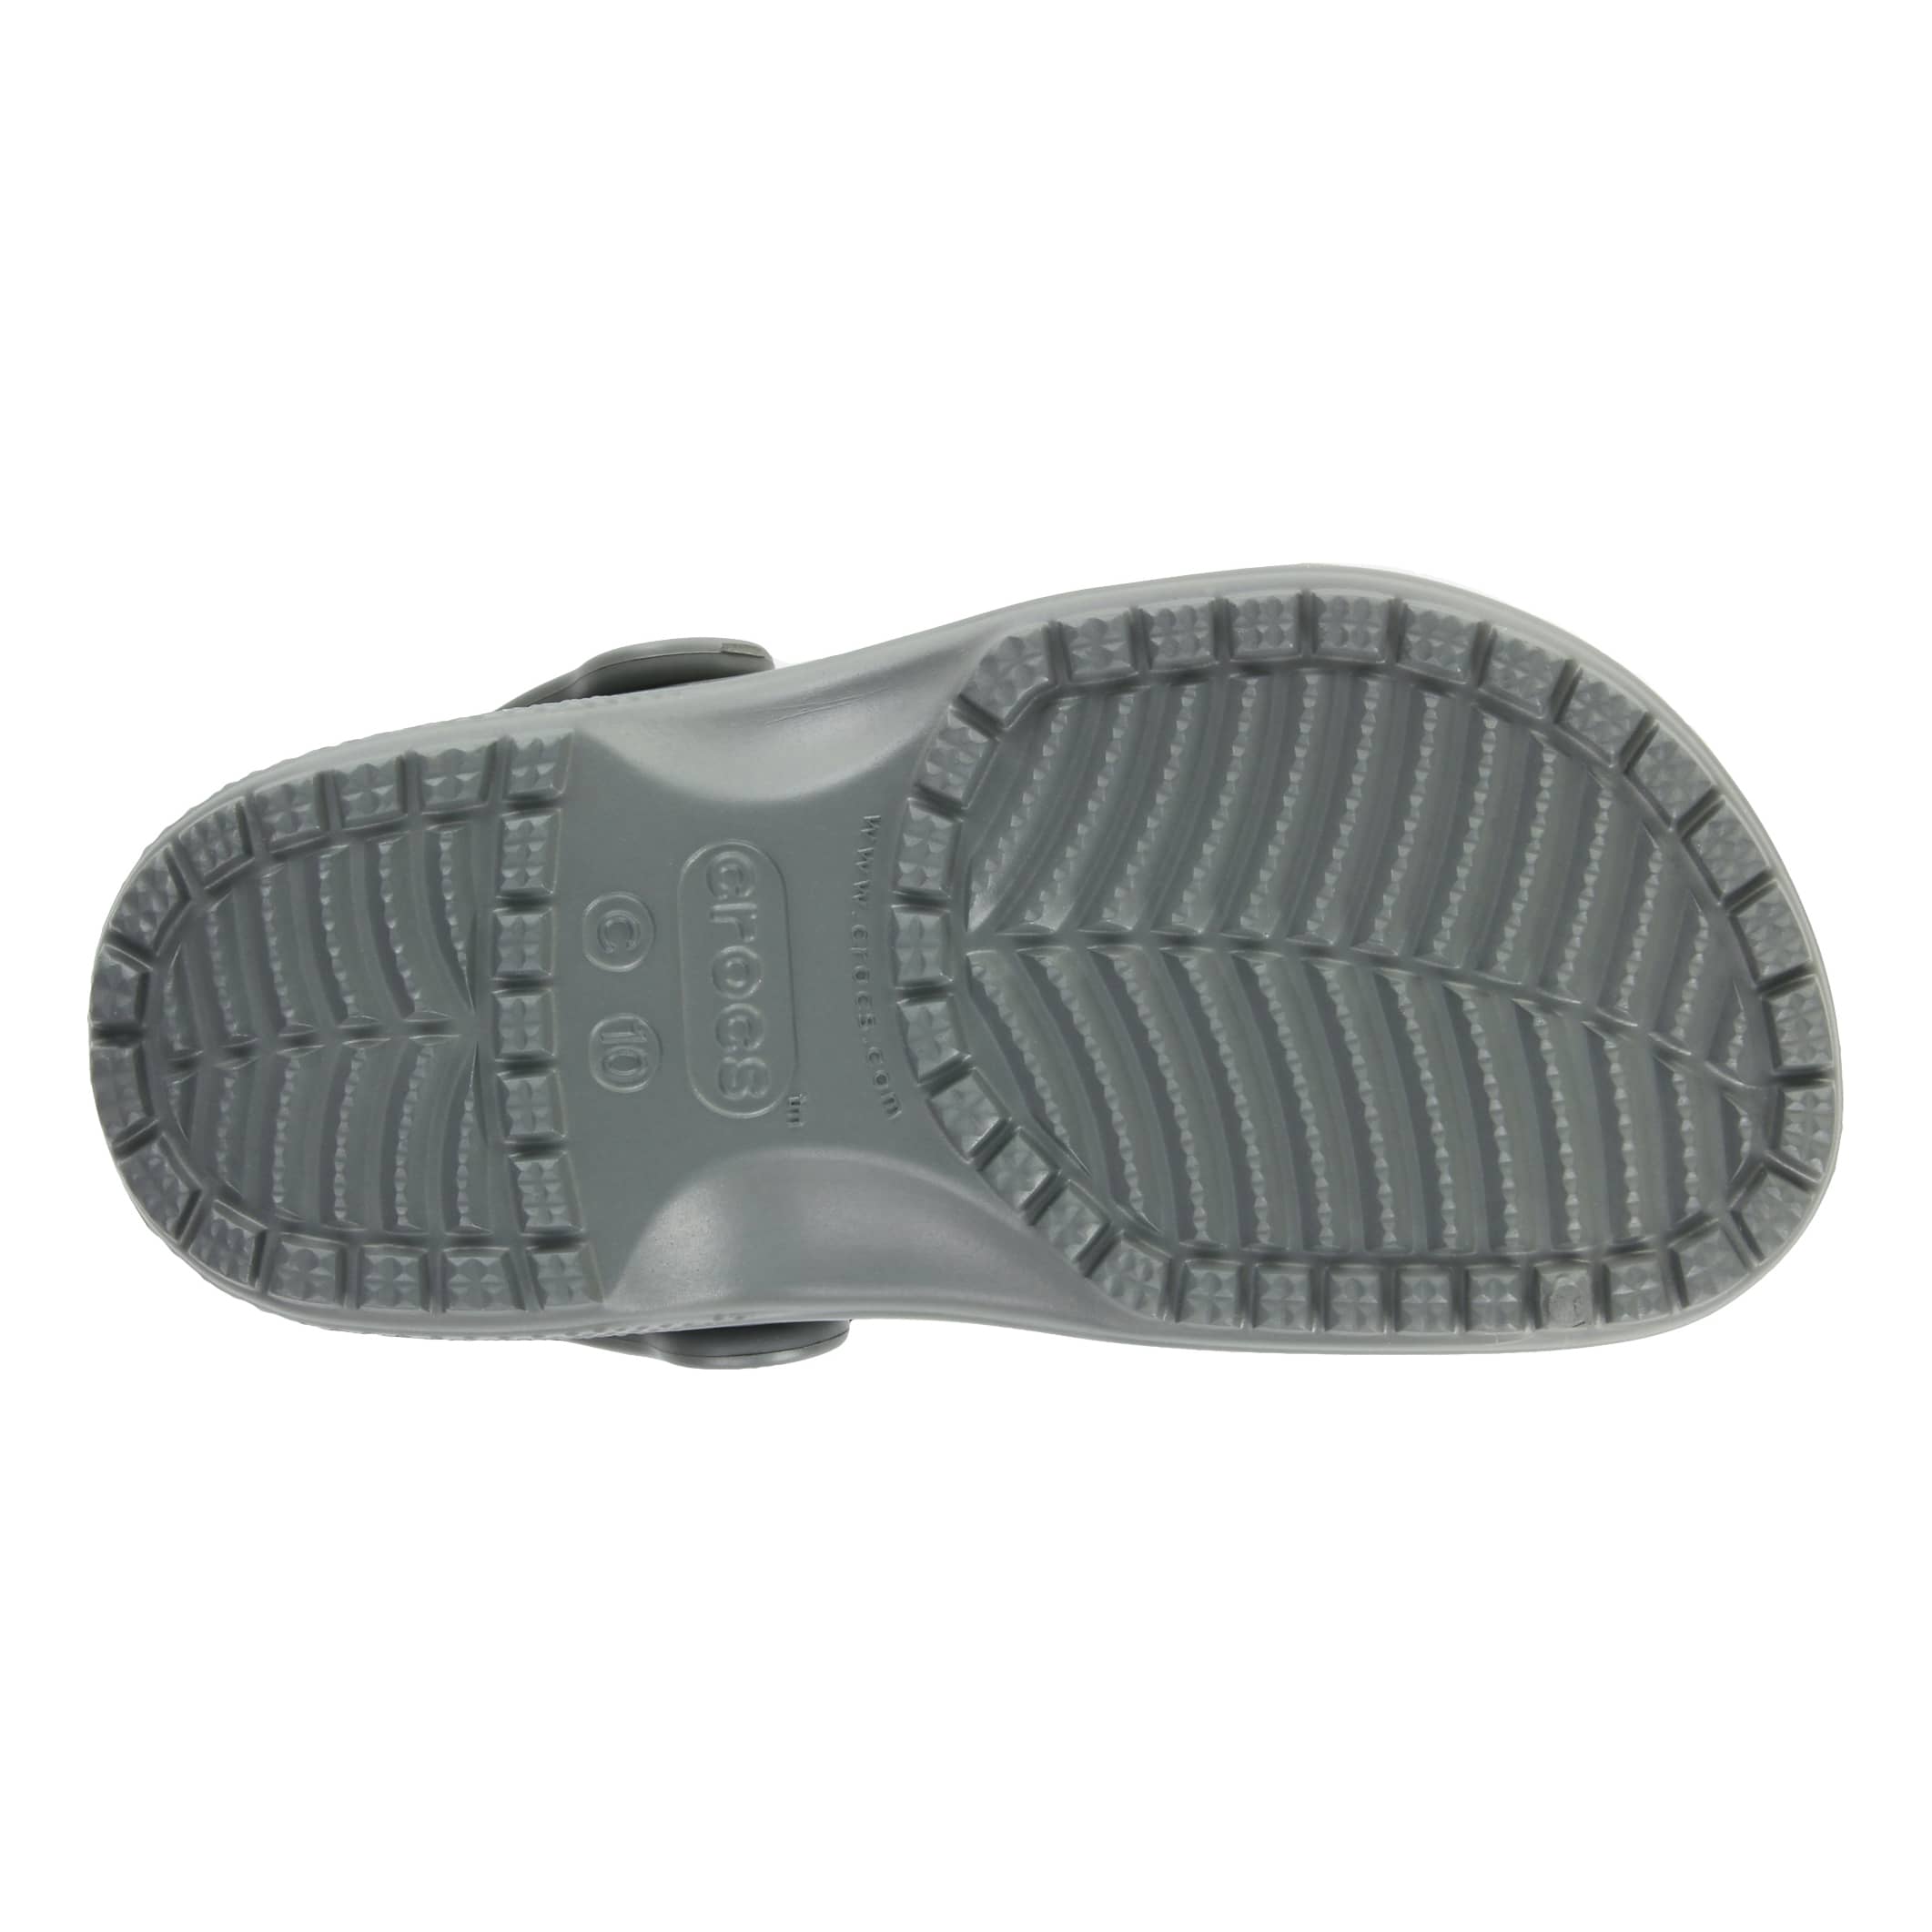 The Crocs™ Youth Classic Clog - sole